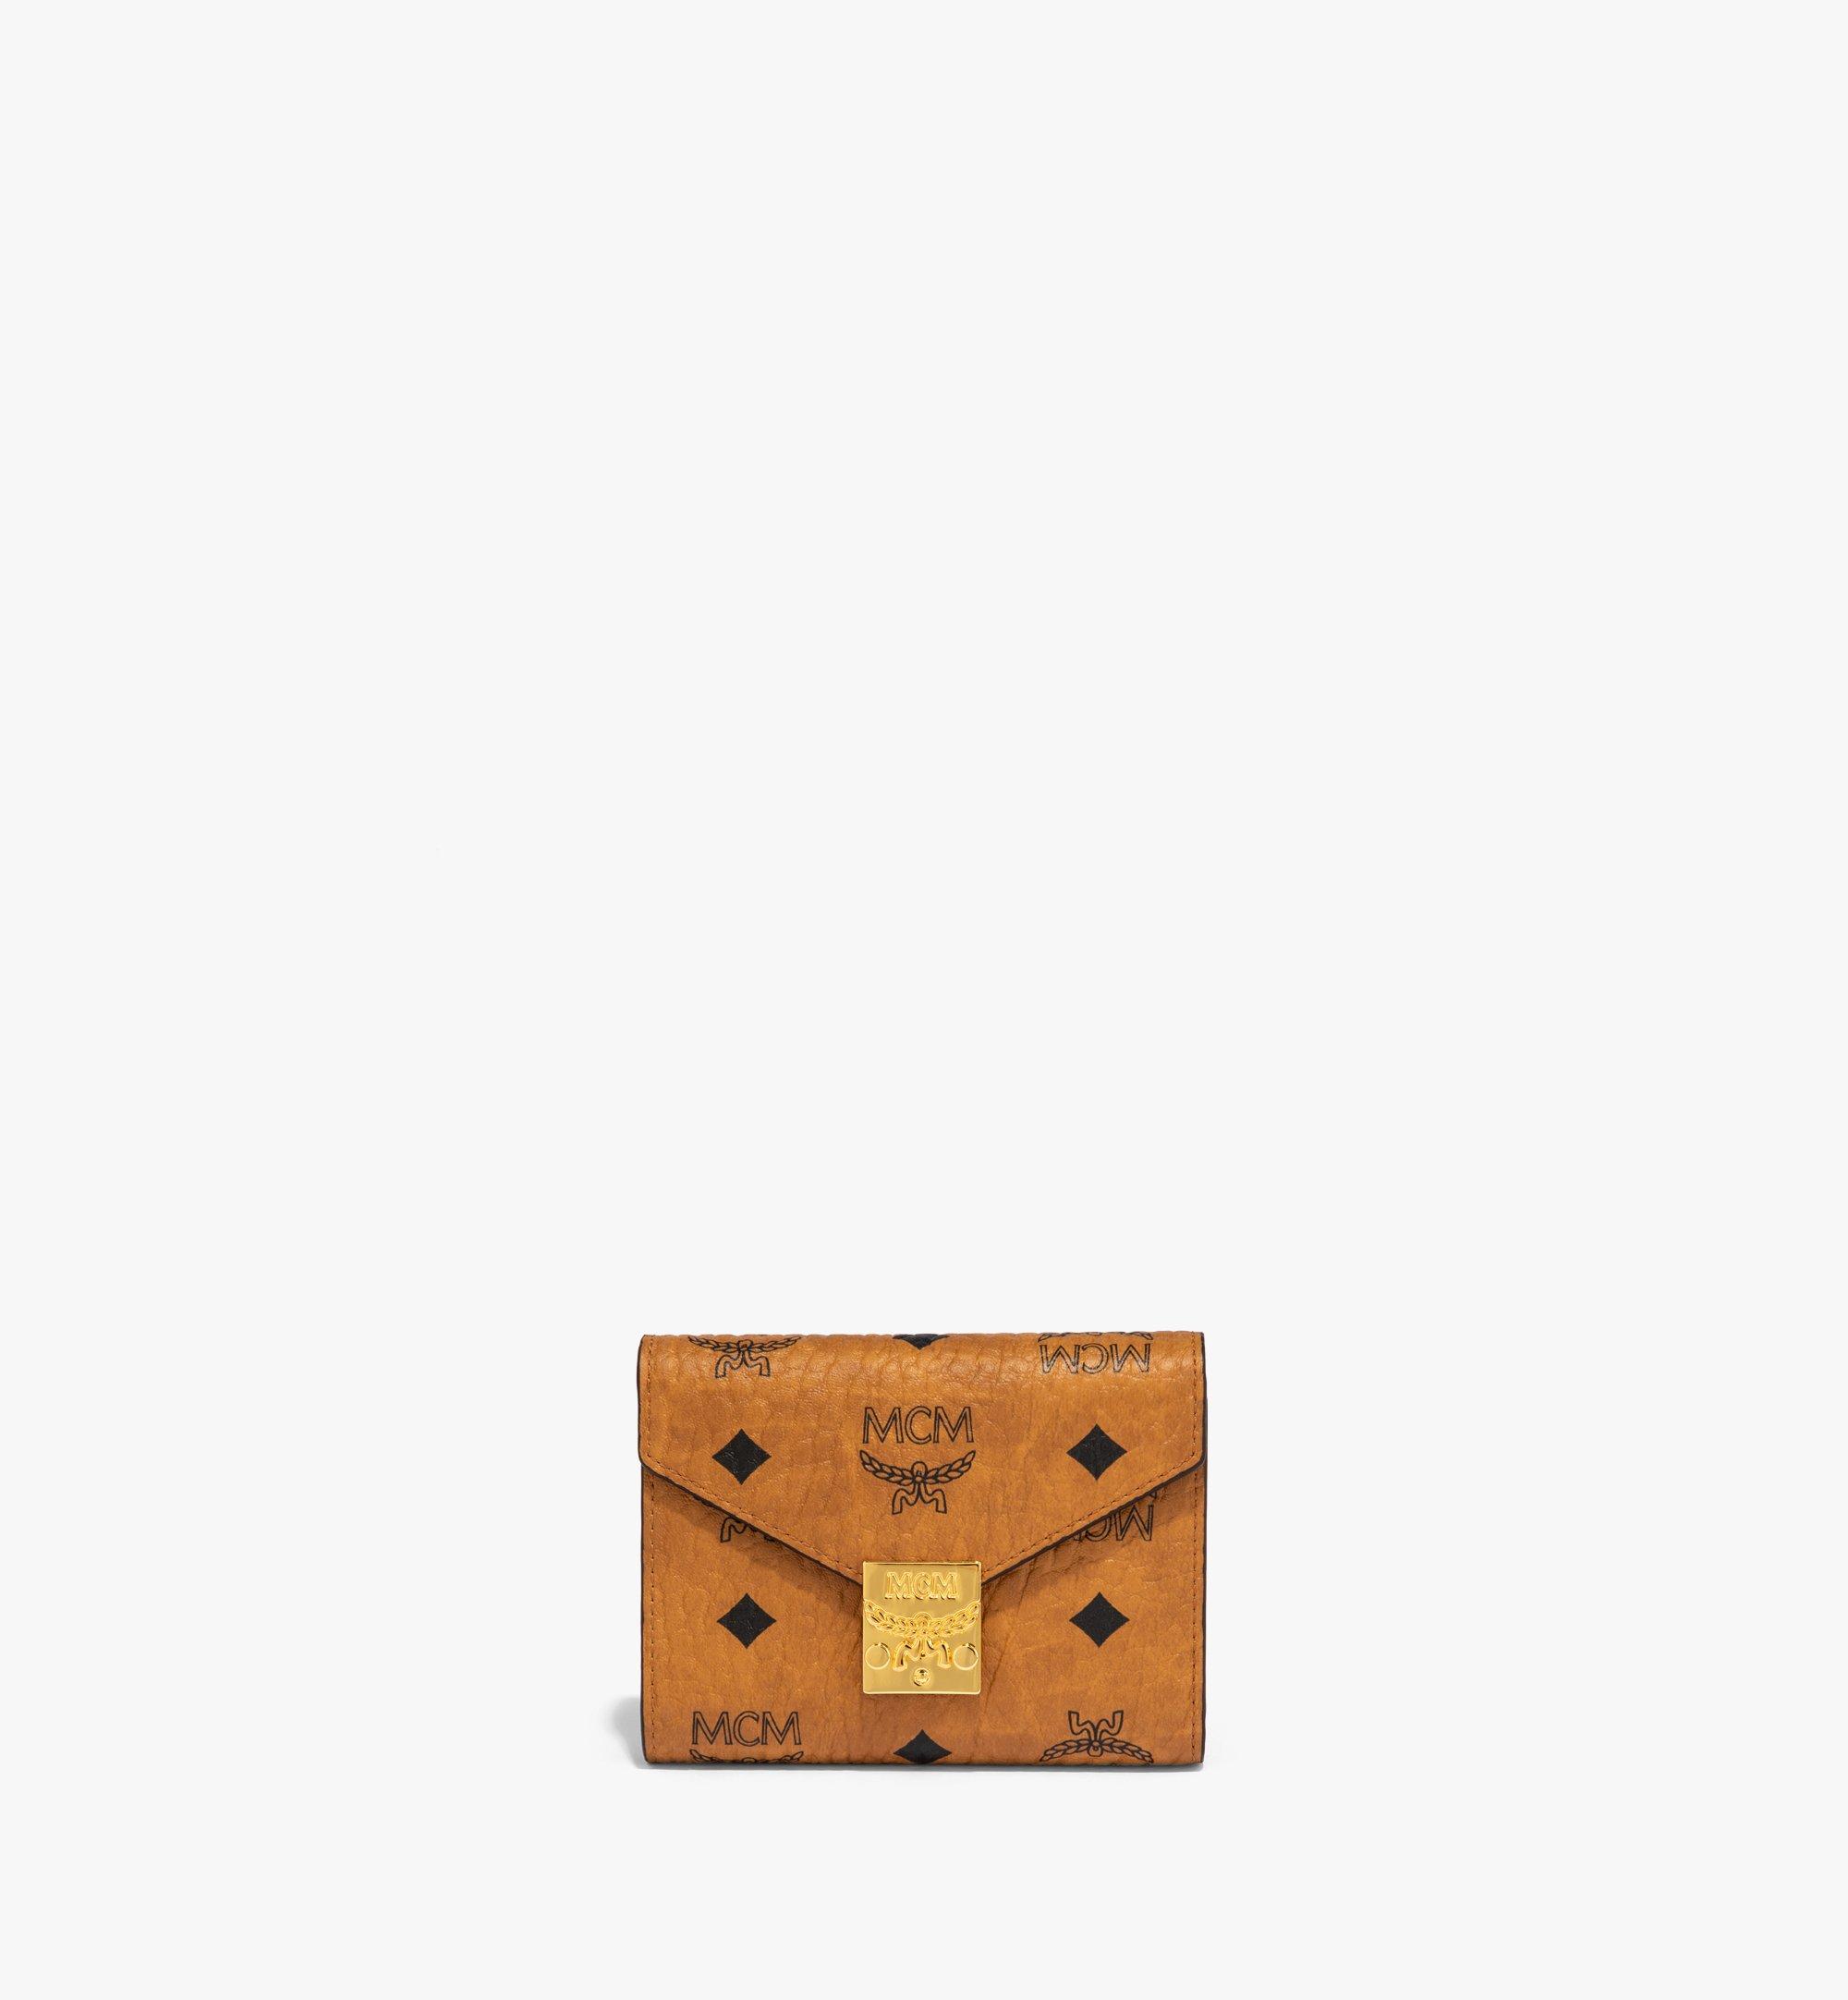 MCM Tracy Trifold Wallet in Visetos Cognac MYSDSXT03CO001 Alternate View 1